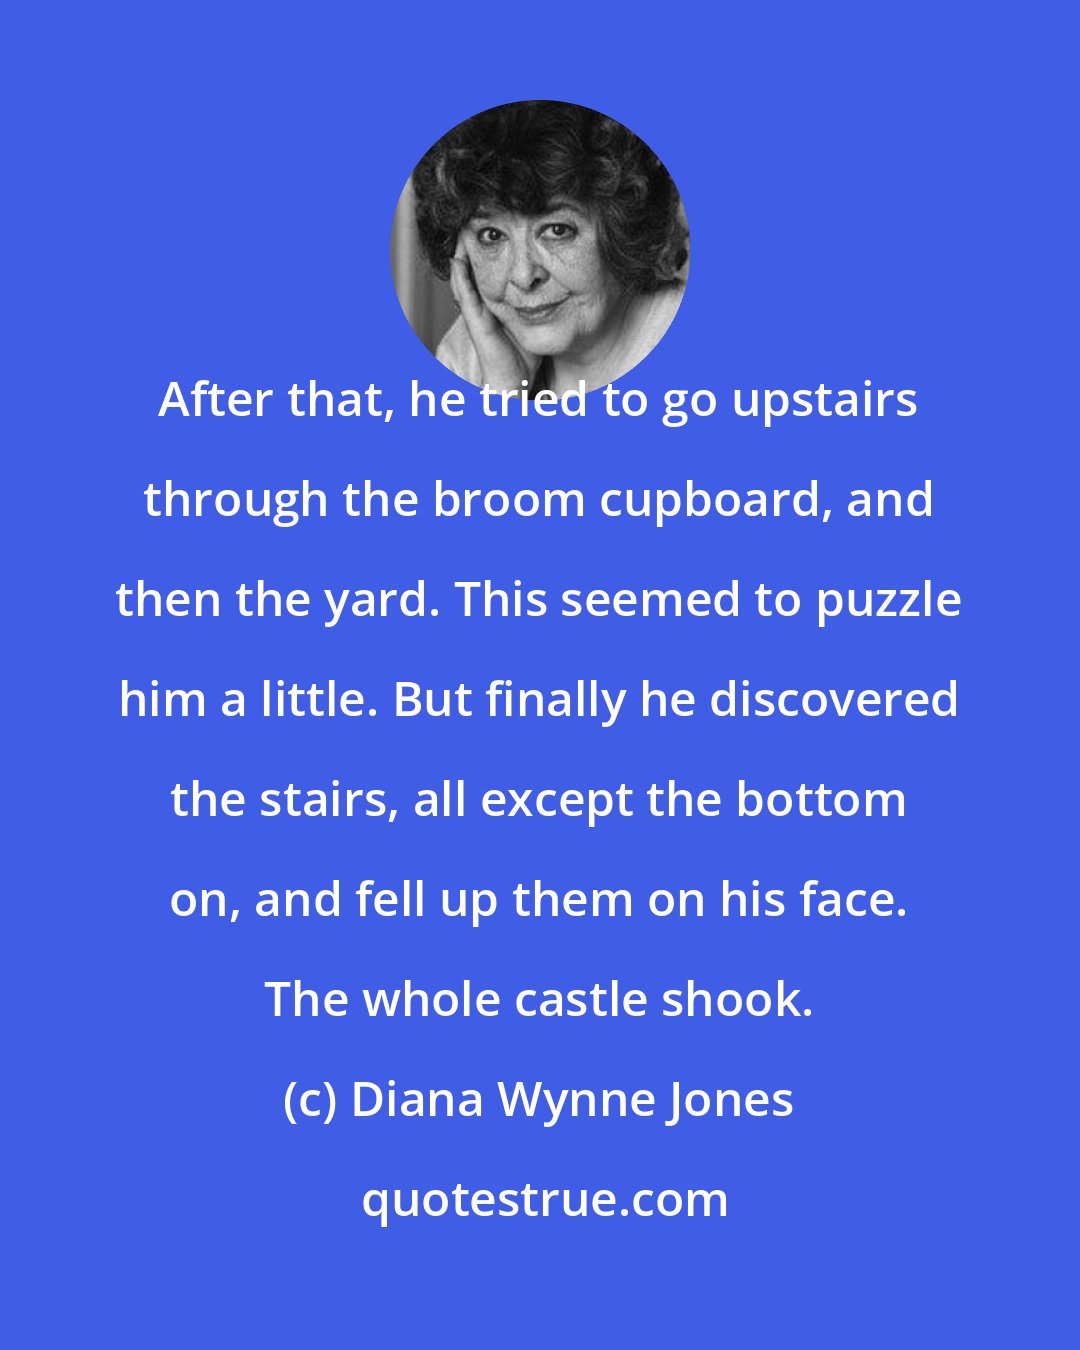 Diana Wynne Jones: After that, he tried to go upstairs through the broom cupboard, and then the yard. This seemed to puzzle him a little. But finally he discovered the stairs, all except the bottom on, and fell up them on his face. The whole castle shook.